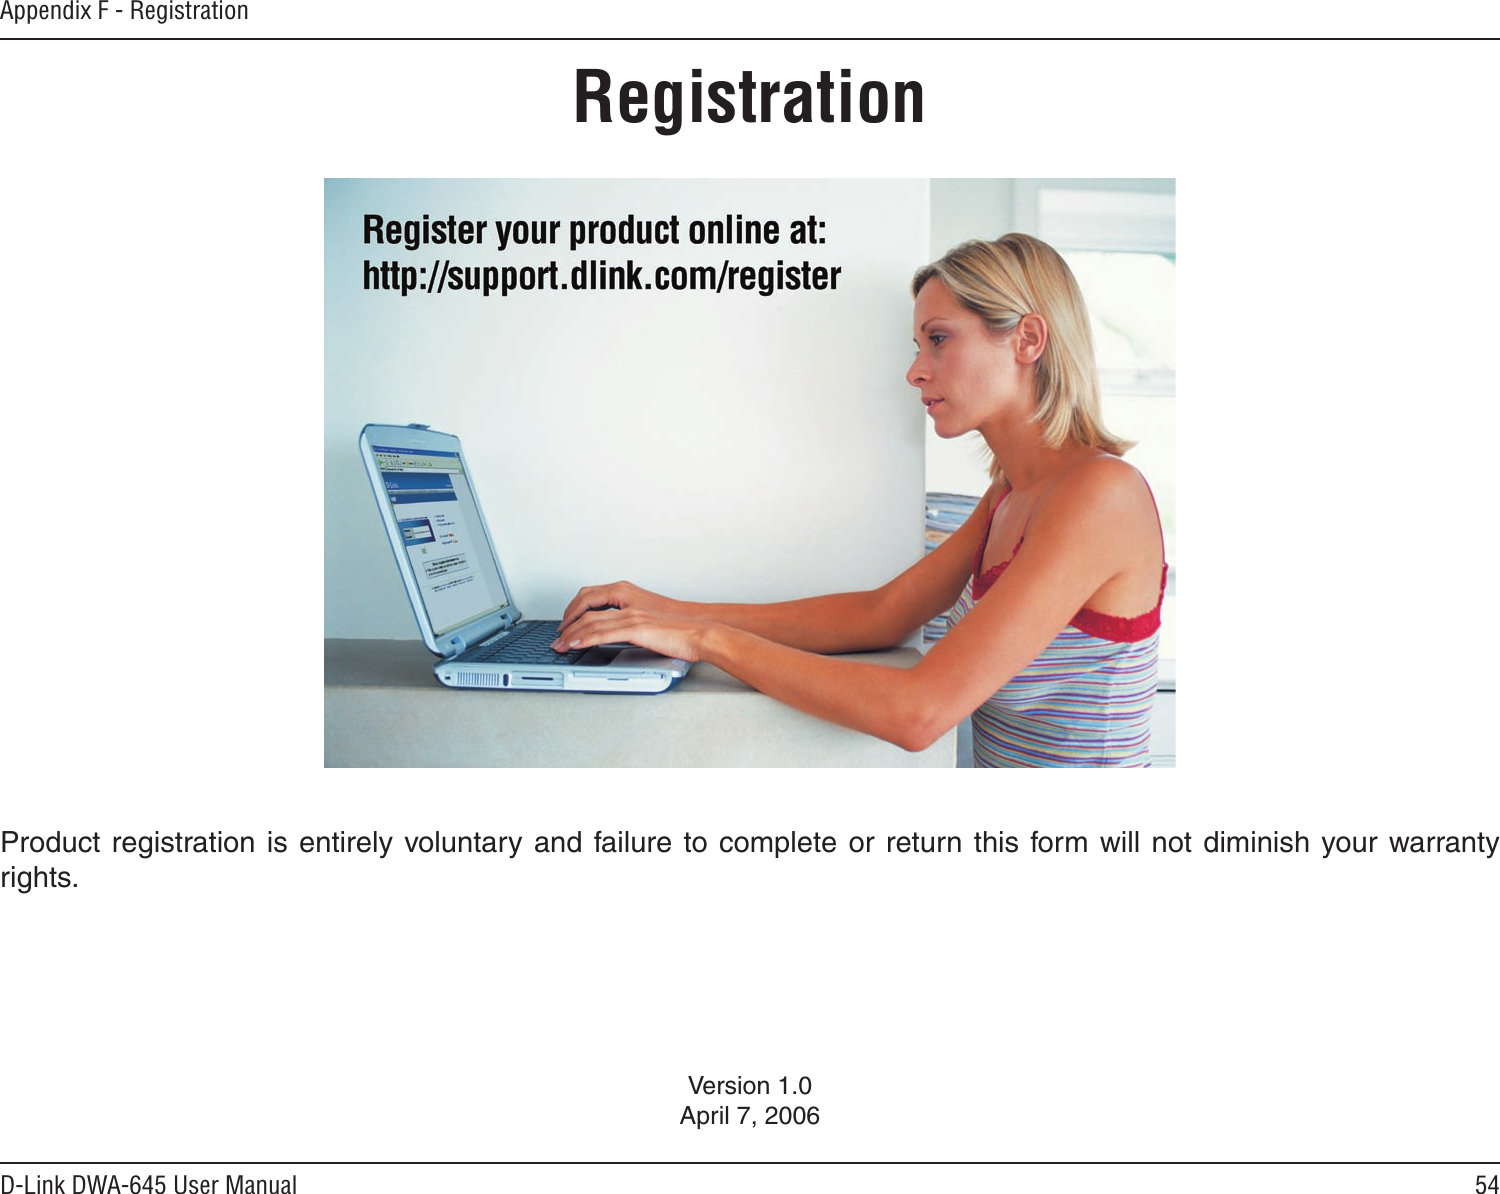 54D-Link DWA-645 User ManualAppendix F - RegistrationVersion 1.0April 7, 2006Product registration is entirely voluntary and failure to complete or return  this form will not  diminish your  warranty rights.Registration